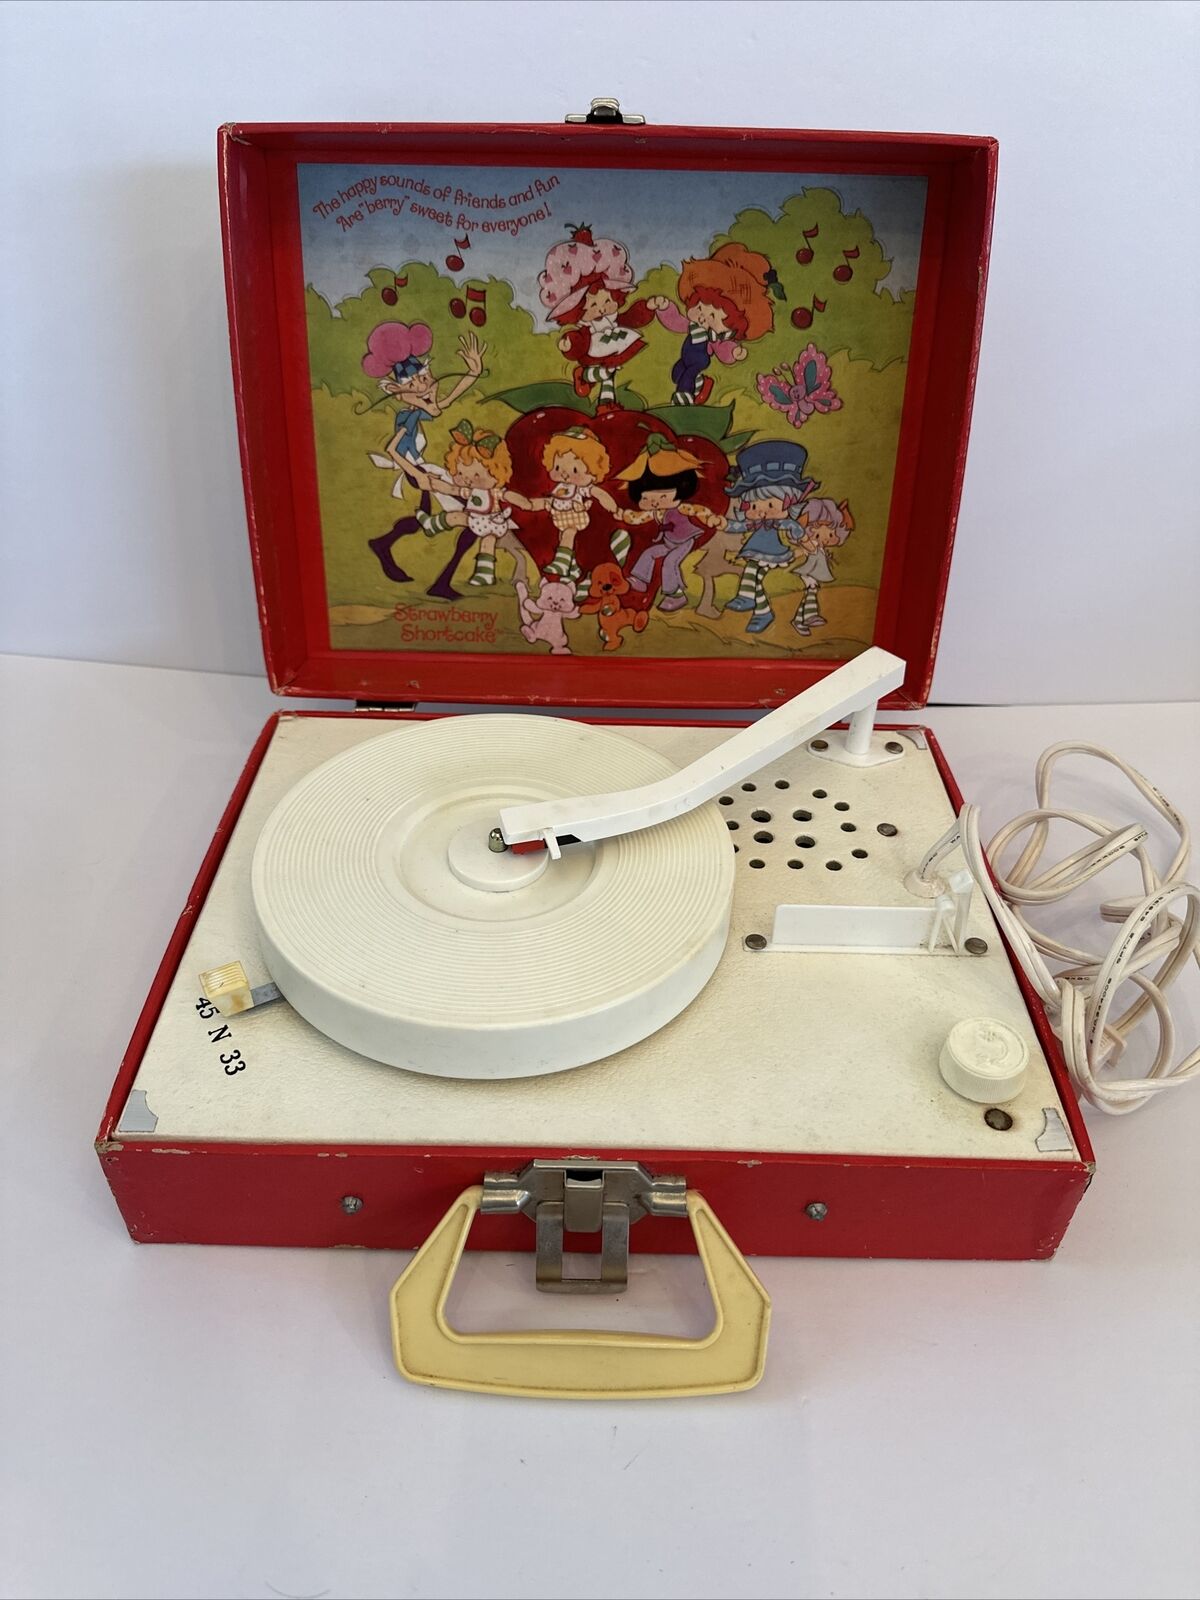 Vintage Strawberry Shortcake Record Player By Playtime - Tested And Working